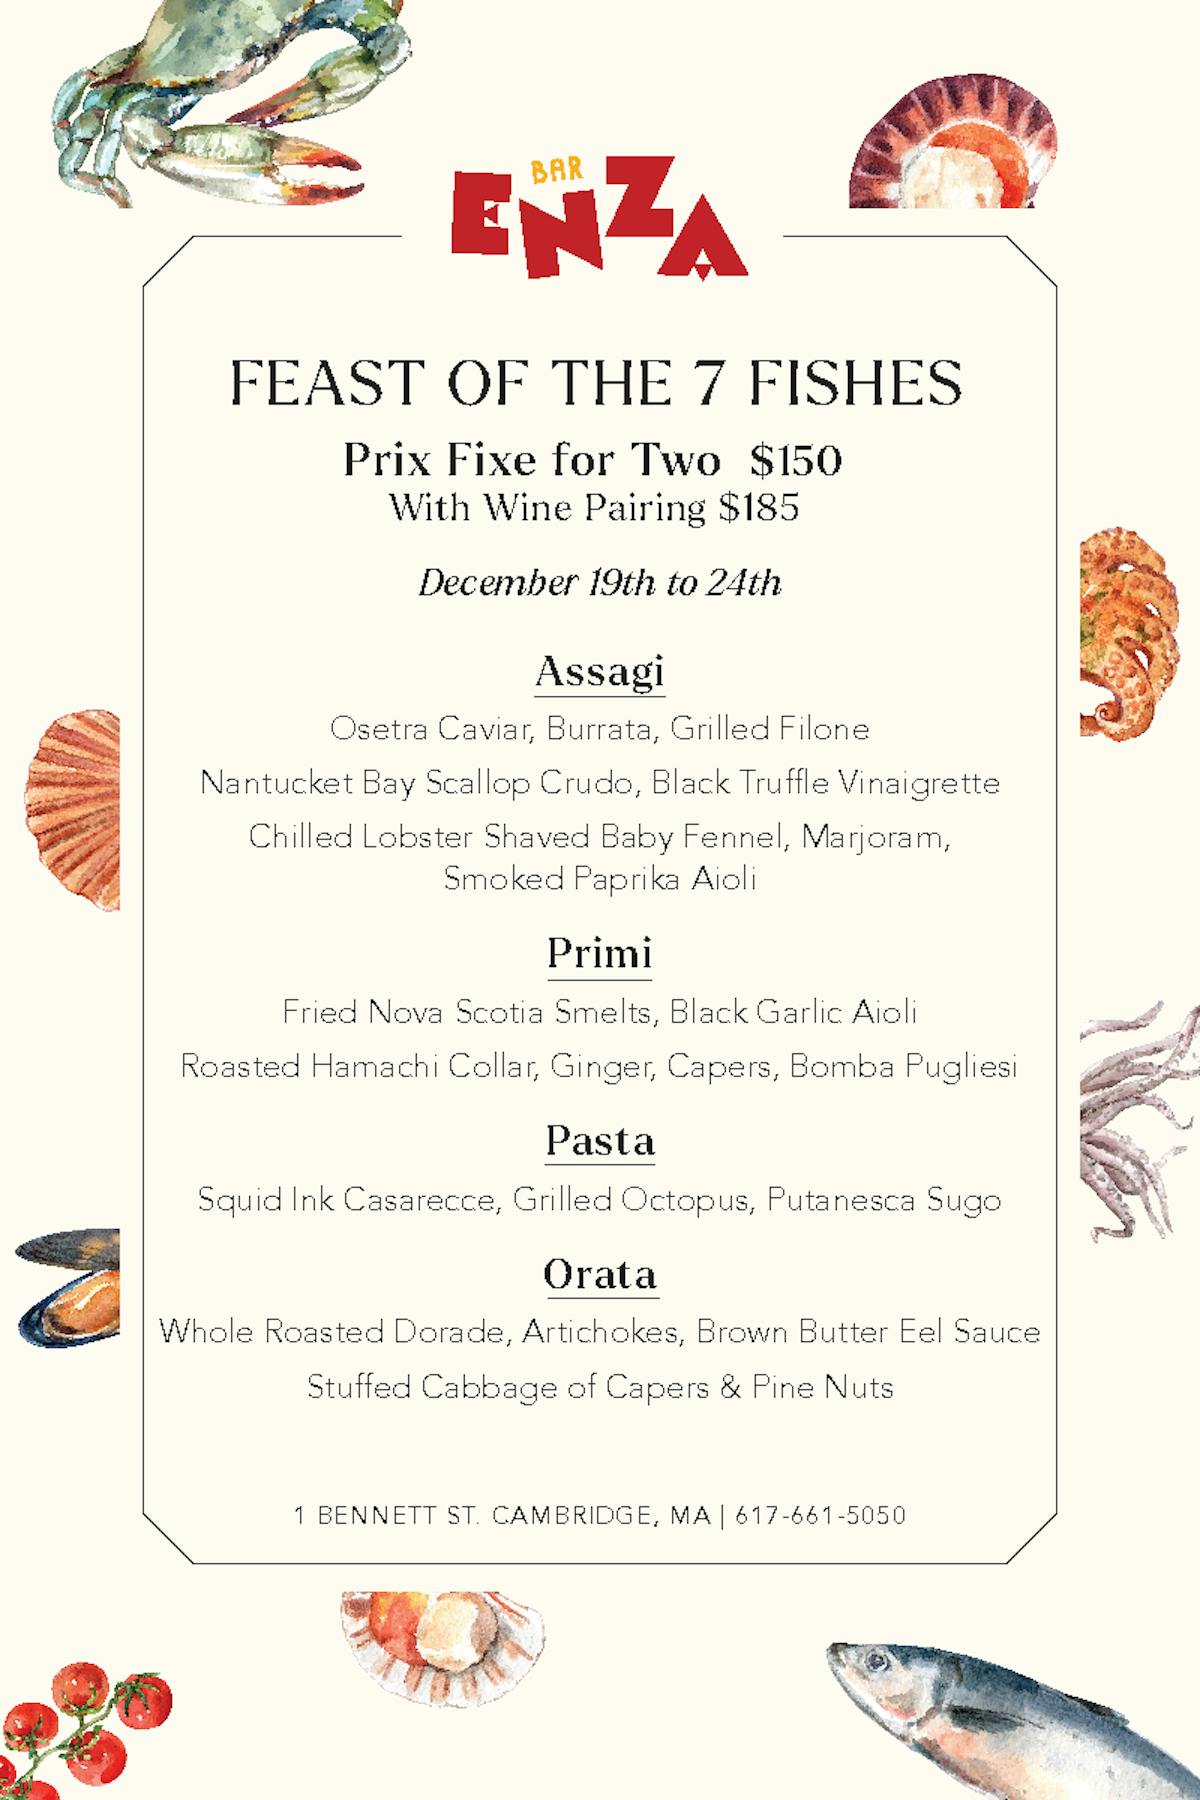 the feast of 7 fishes at bar enza